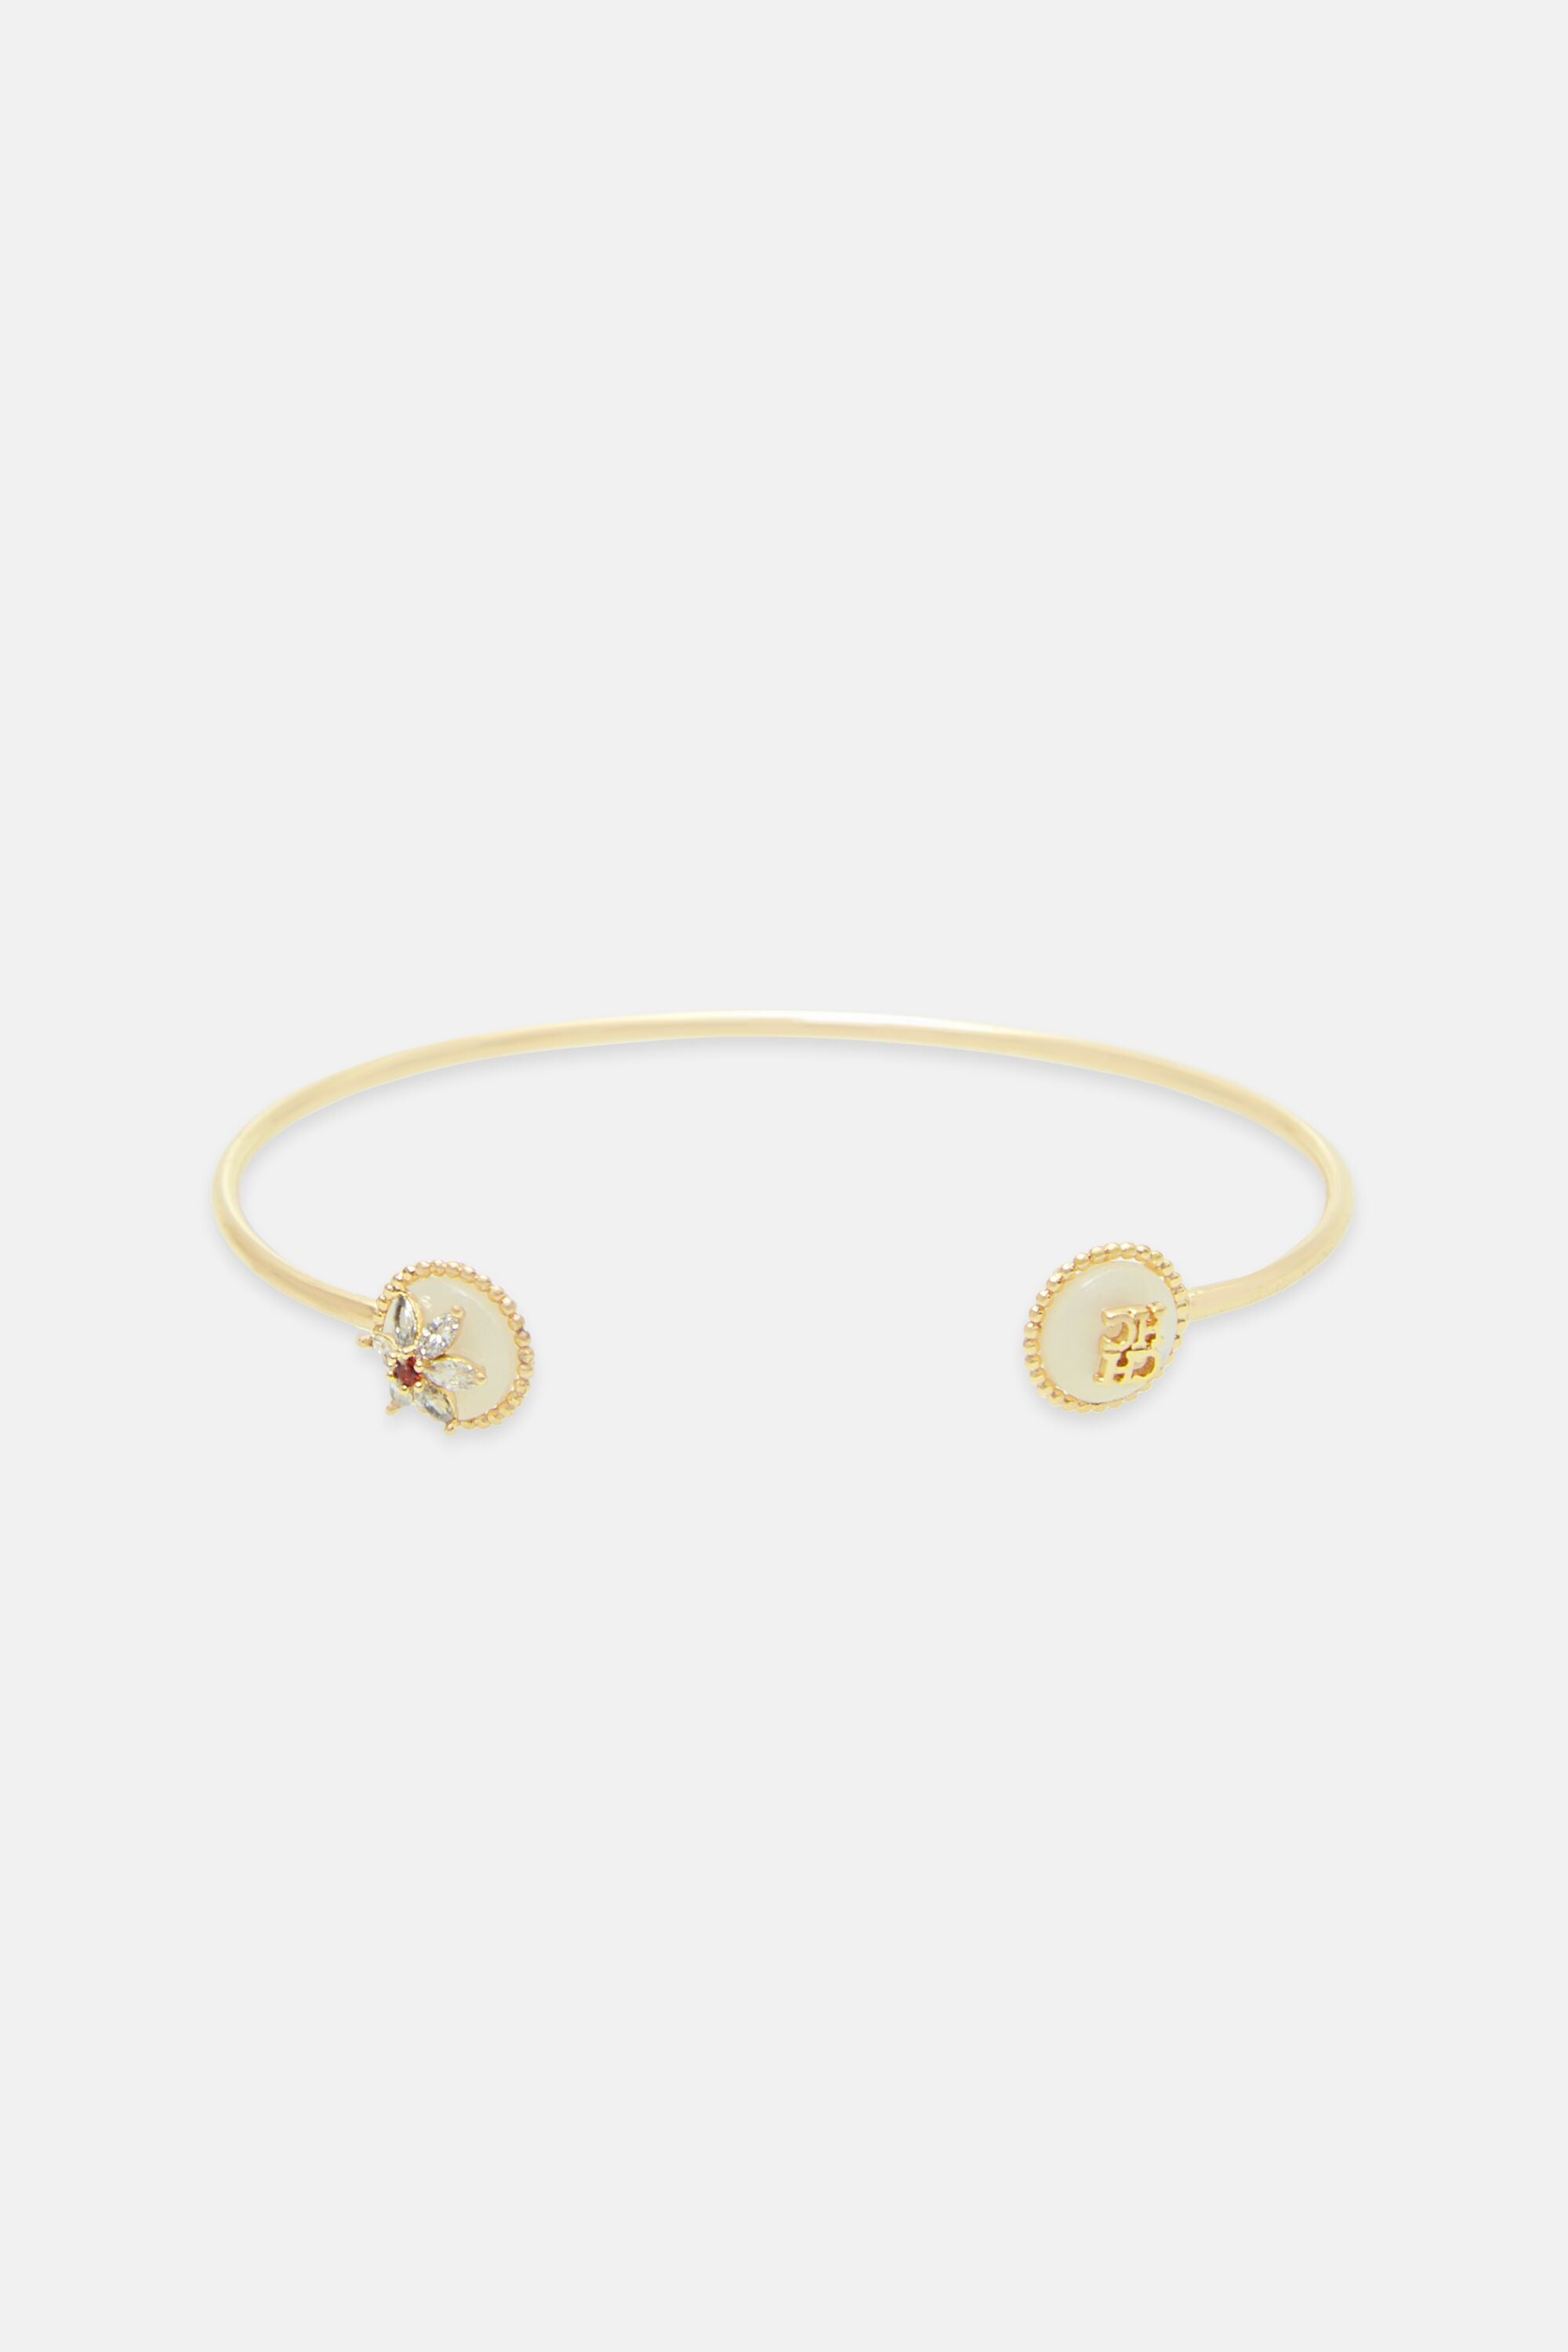 kate spade new york pearly delight bangle  Nordstrom  Kate spade  jewelry Kate spade bangle Bangles